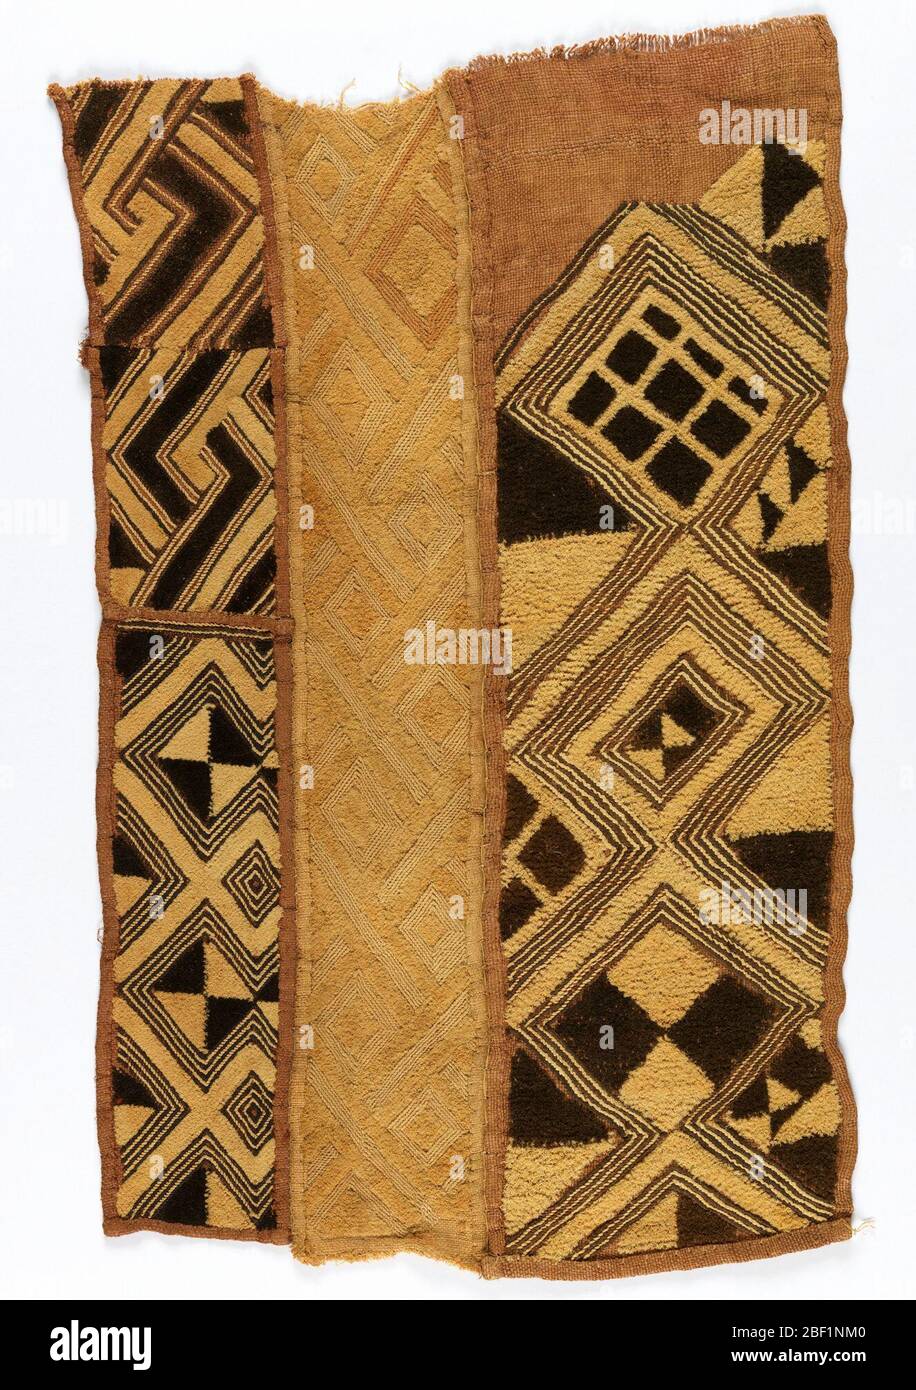 Status cloth. Four pieces of woven raffia seamed together down the long sides with buttonhole stitch to form a rectangular panel. Each piece is patterned with irregular geometric forms in tan and dark brown raffia pile with reddish-brown outlining stitch. Stock Photo